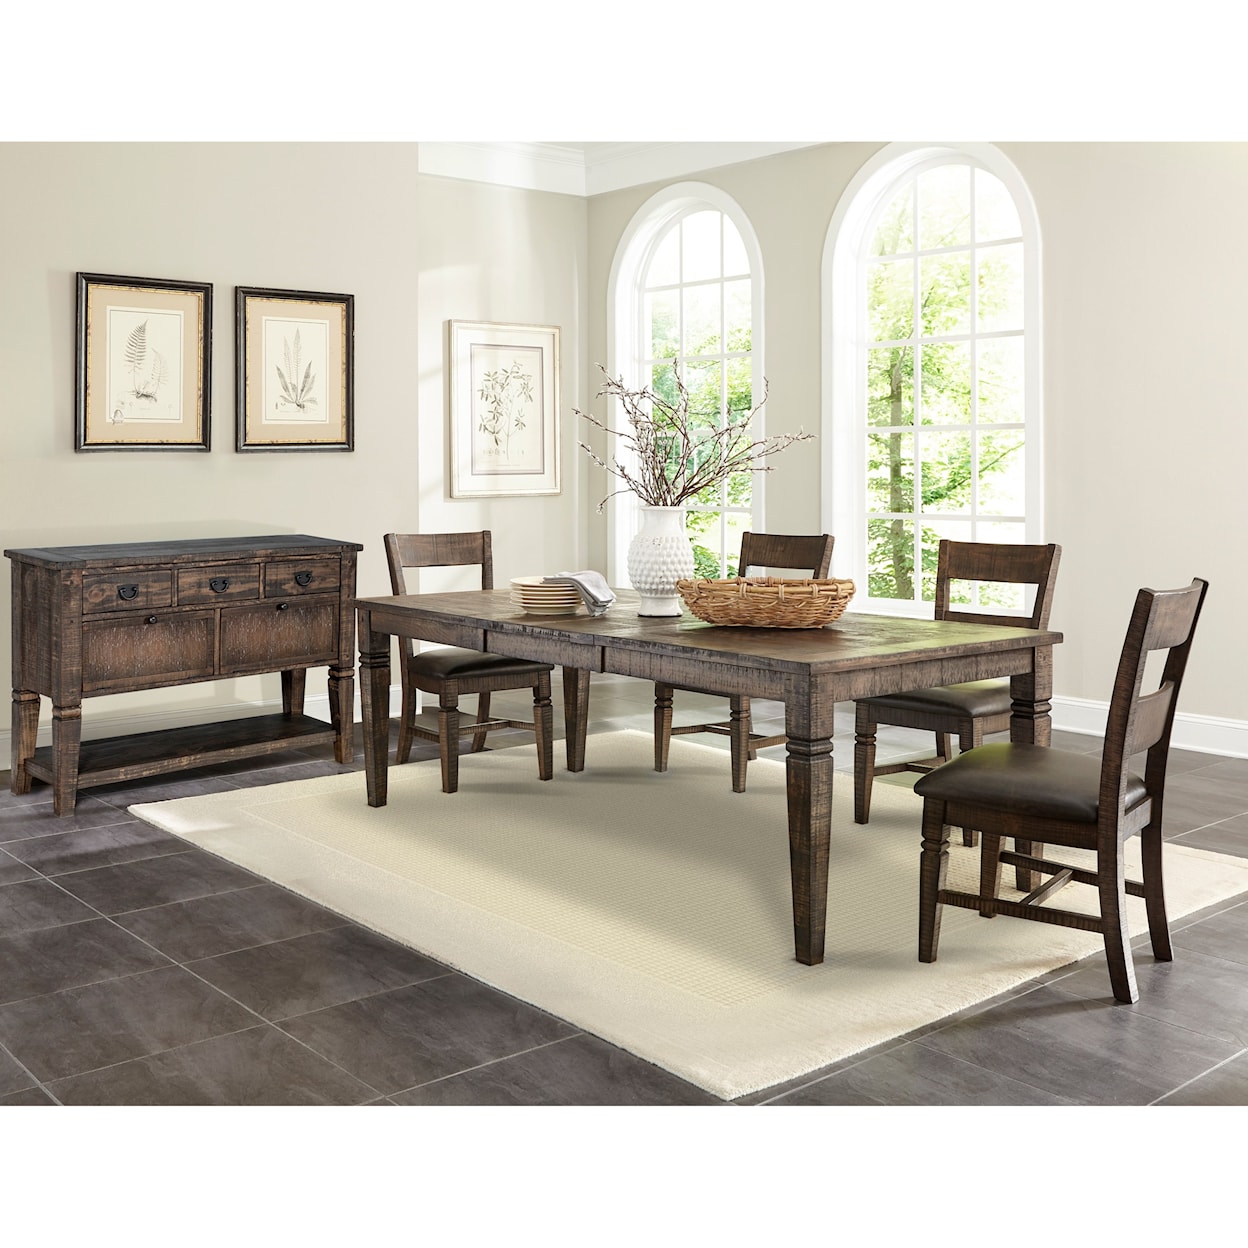 Sunny Designs Homestead Dining Table Set for Four